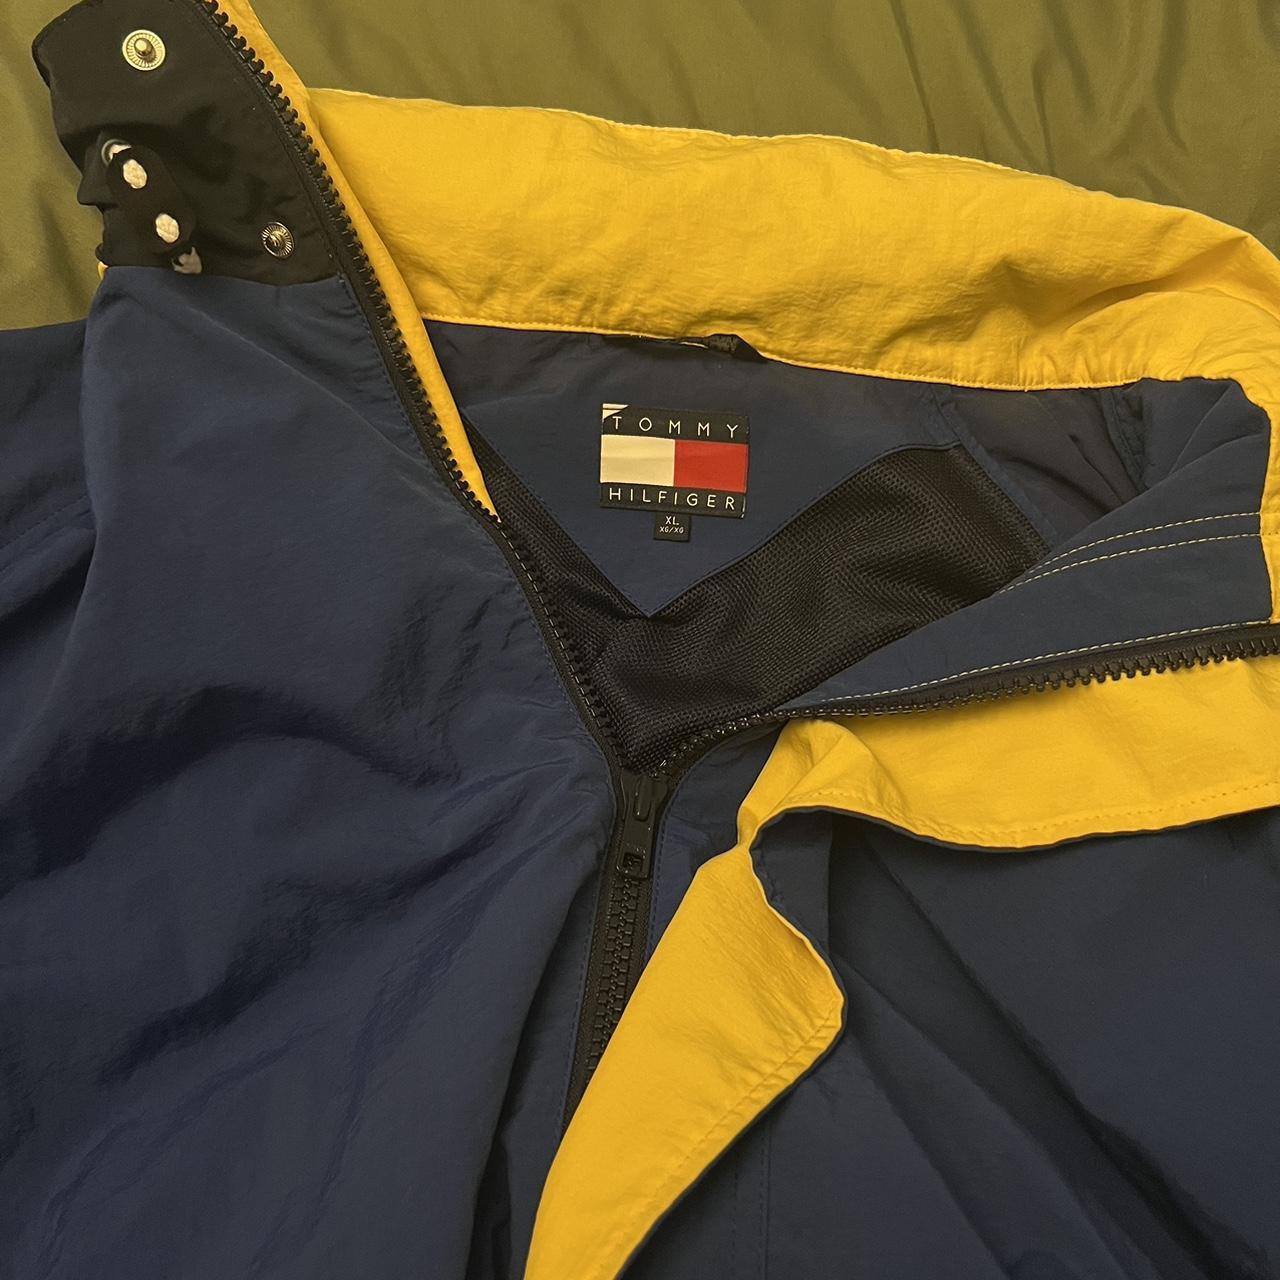 Tommy Hilfiger Men's Blue and Yellow Jacket (5)